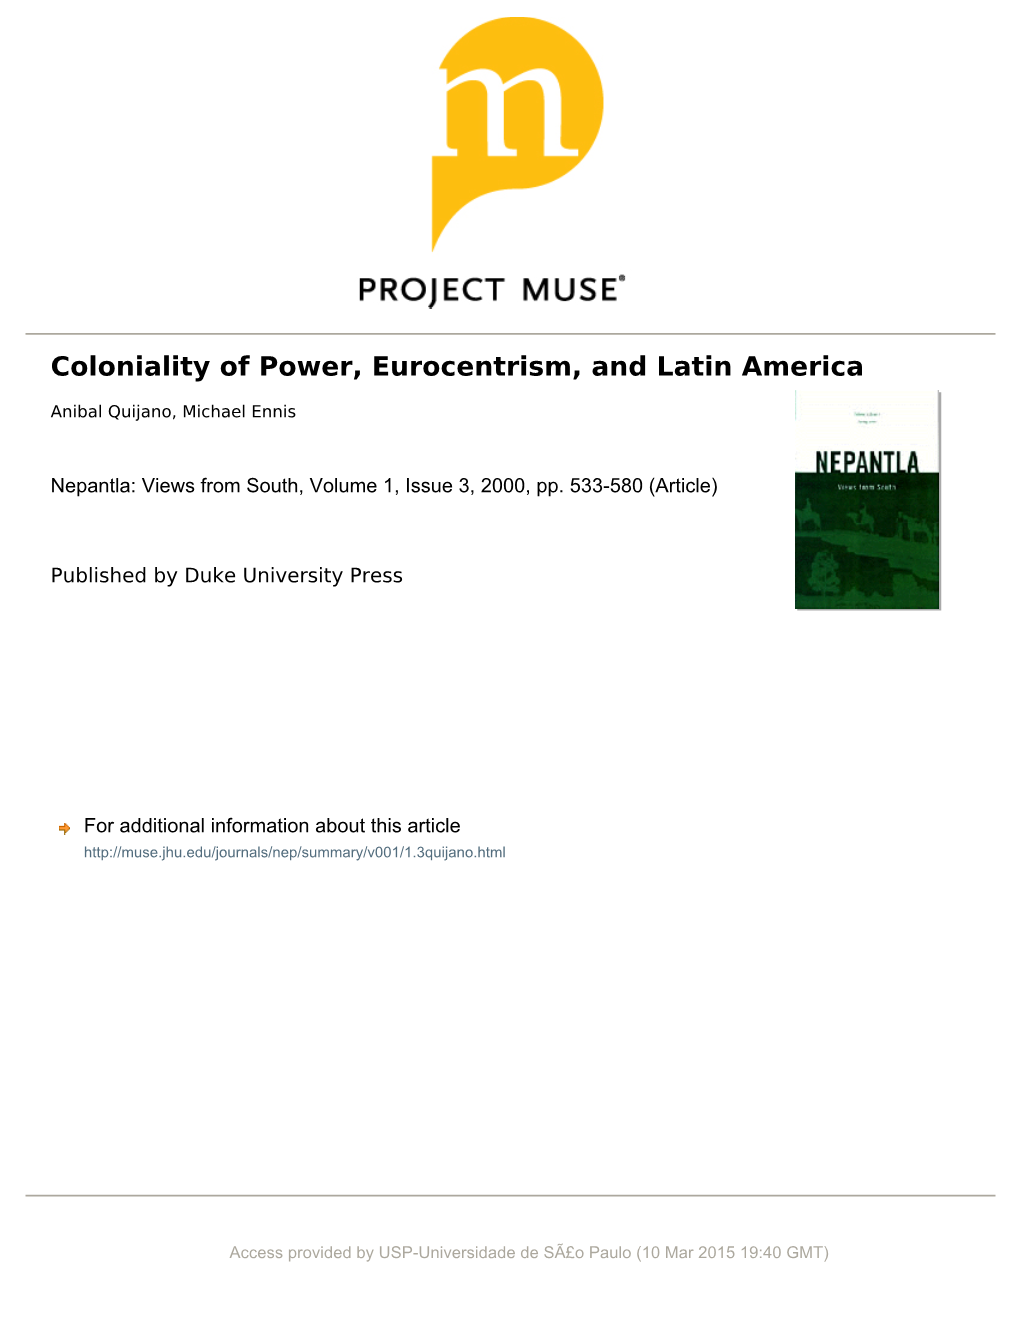 Coloniality of Power, Eurocentrism, and Latin America